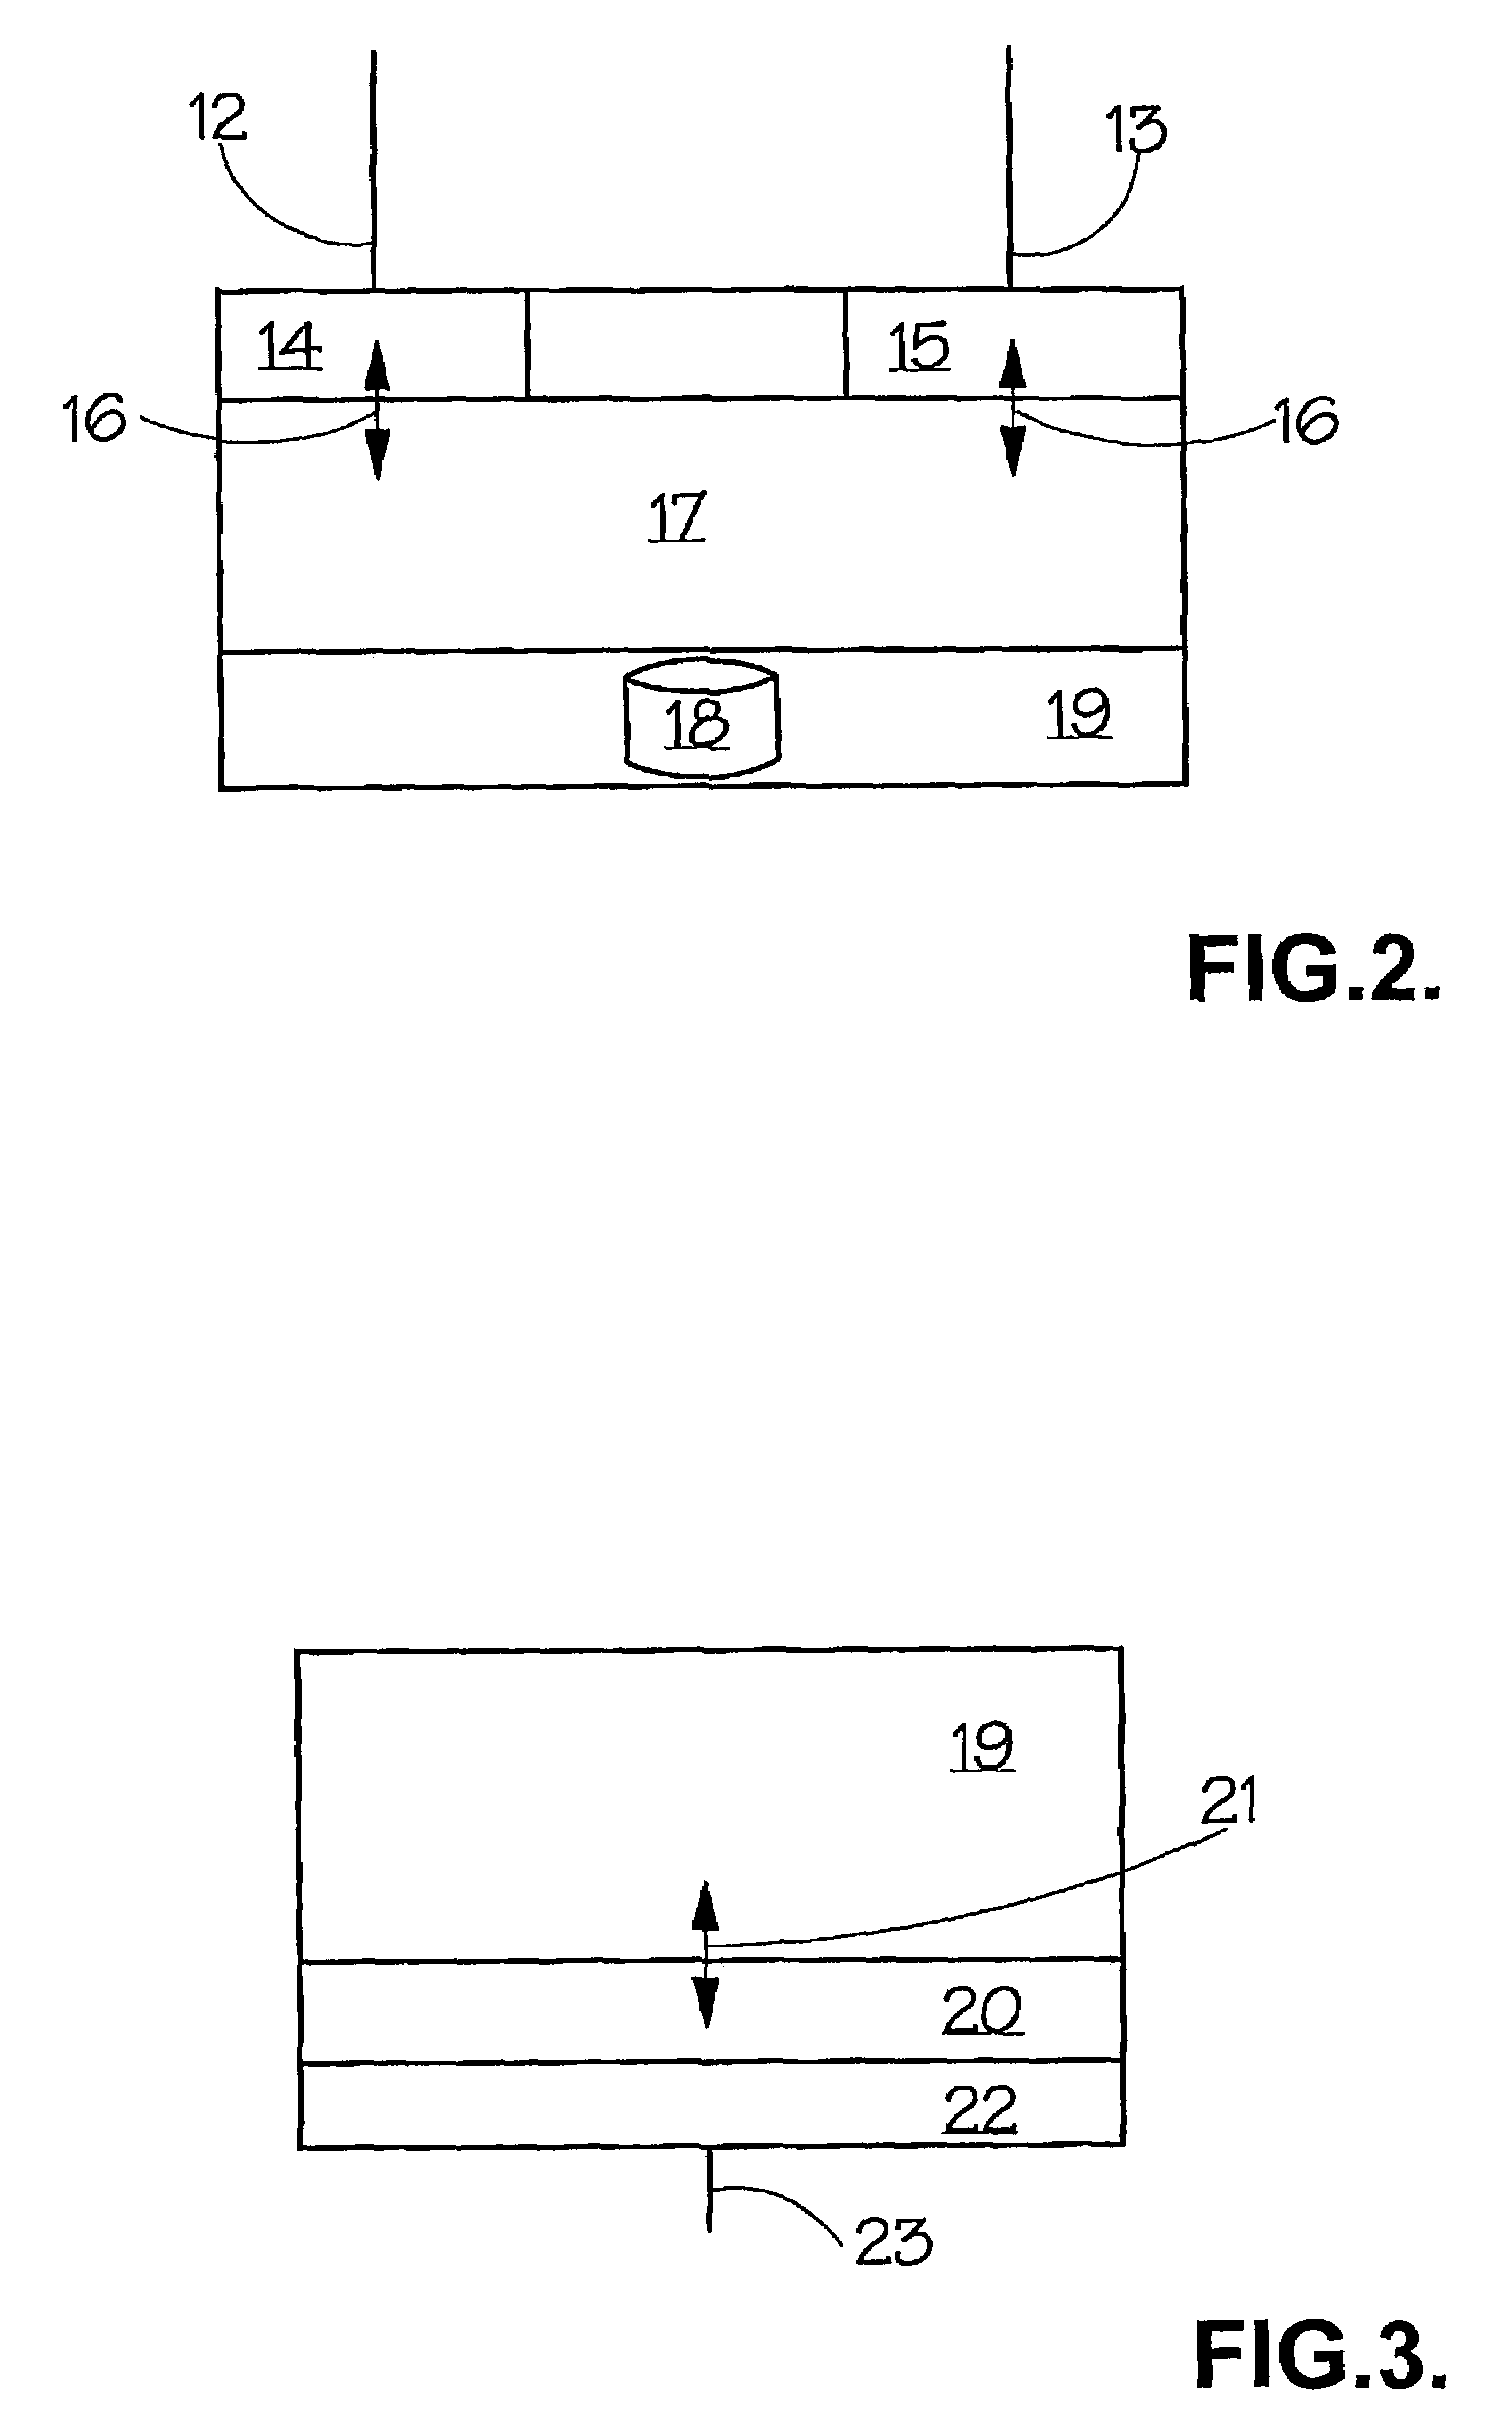 System and method for recording voice and the data entered by a call center agent and retrieval of these communication streams for analysis or correction